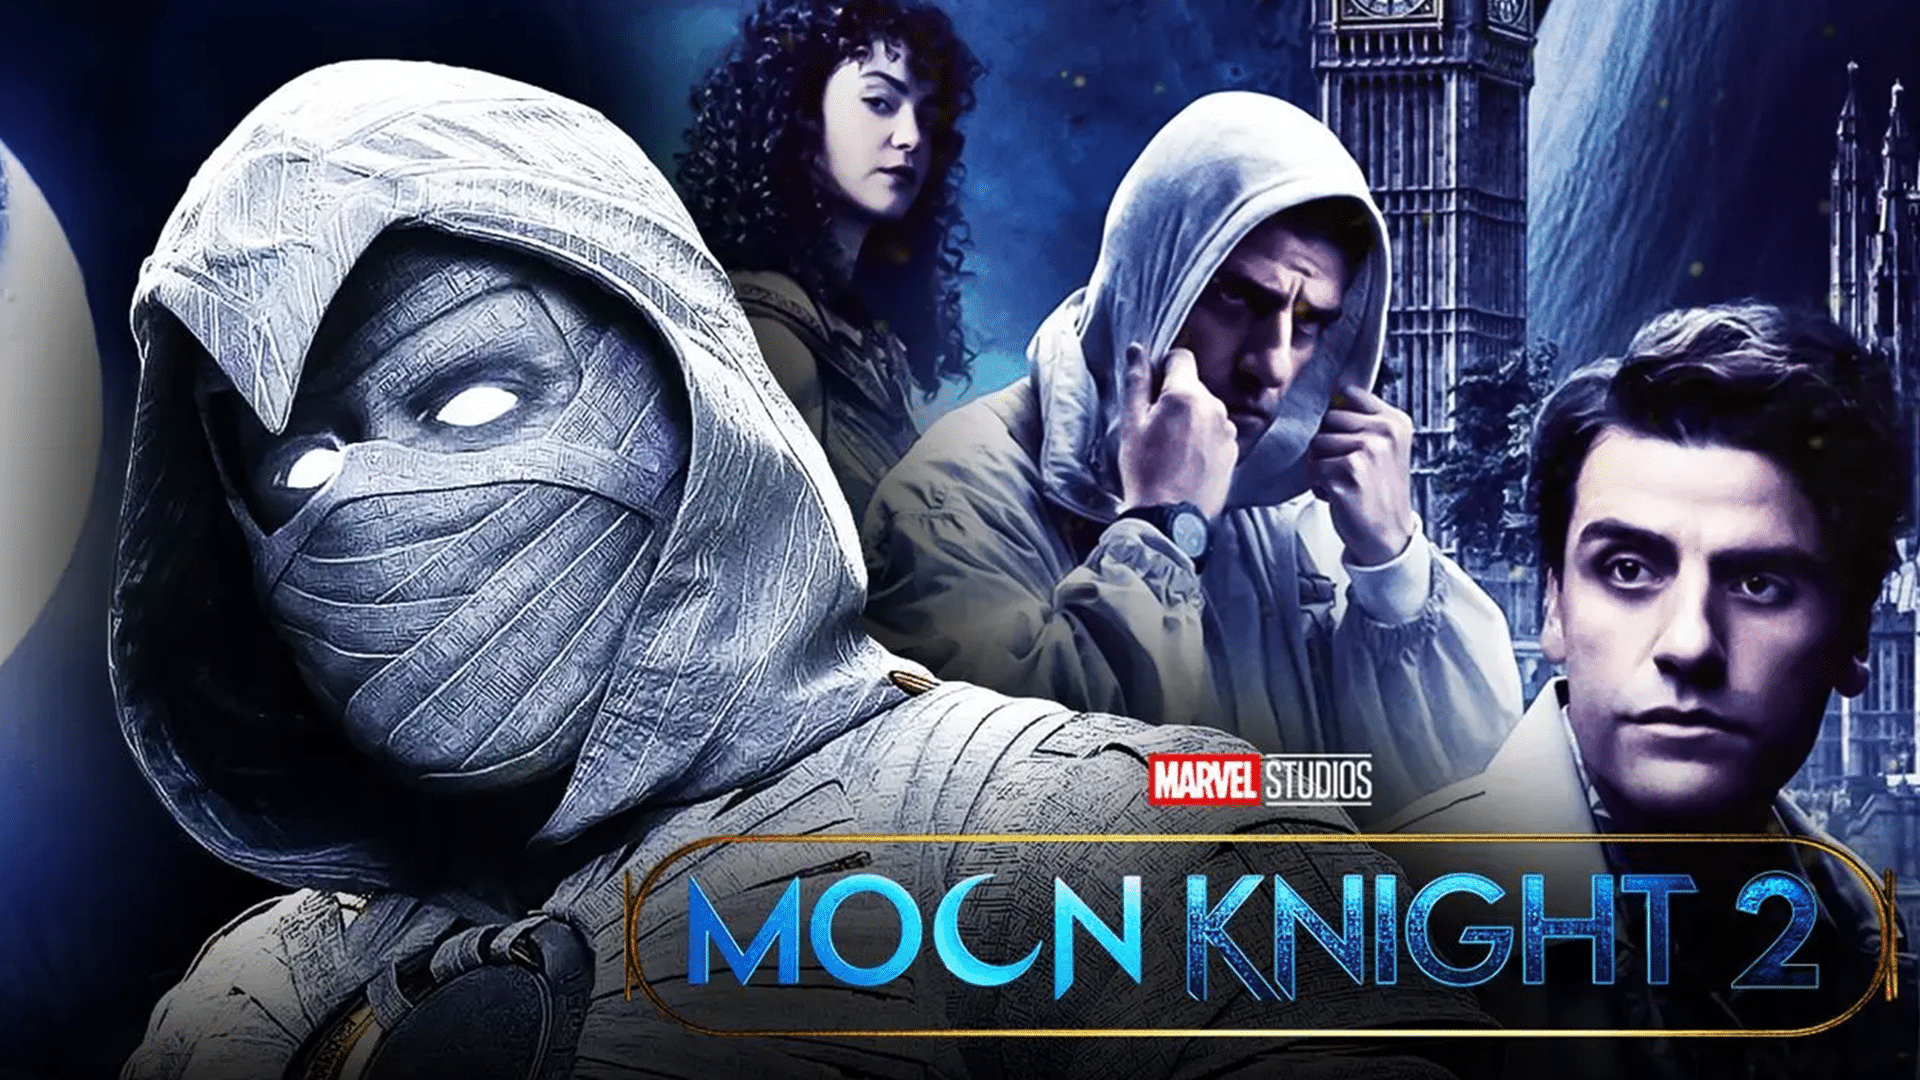 When is Moon Knight Season 2 expected to release?